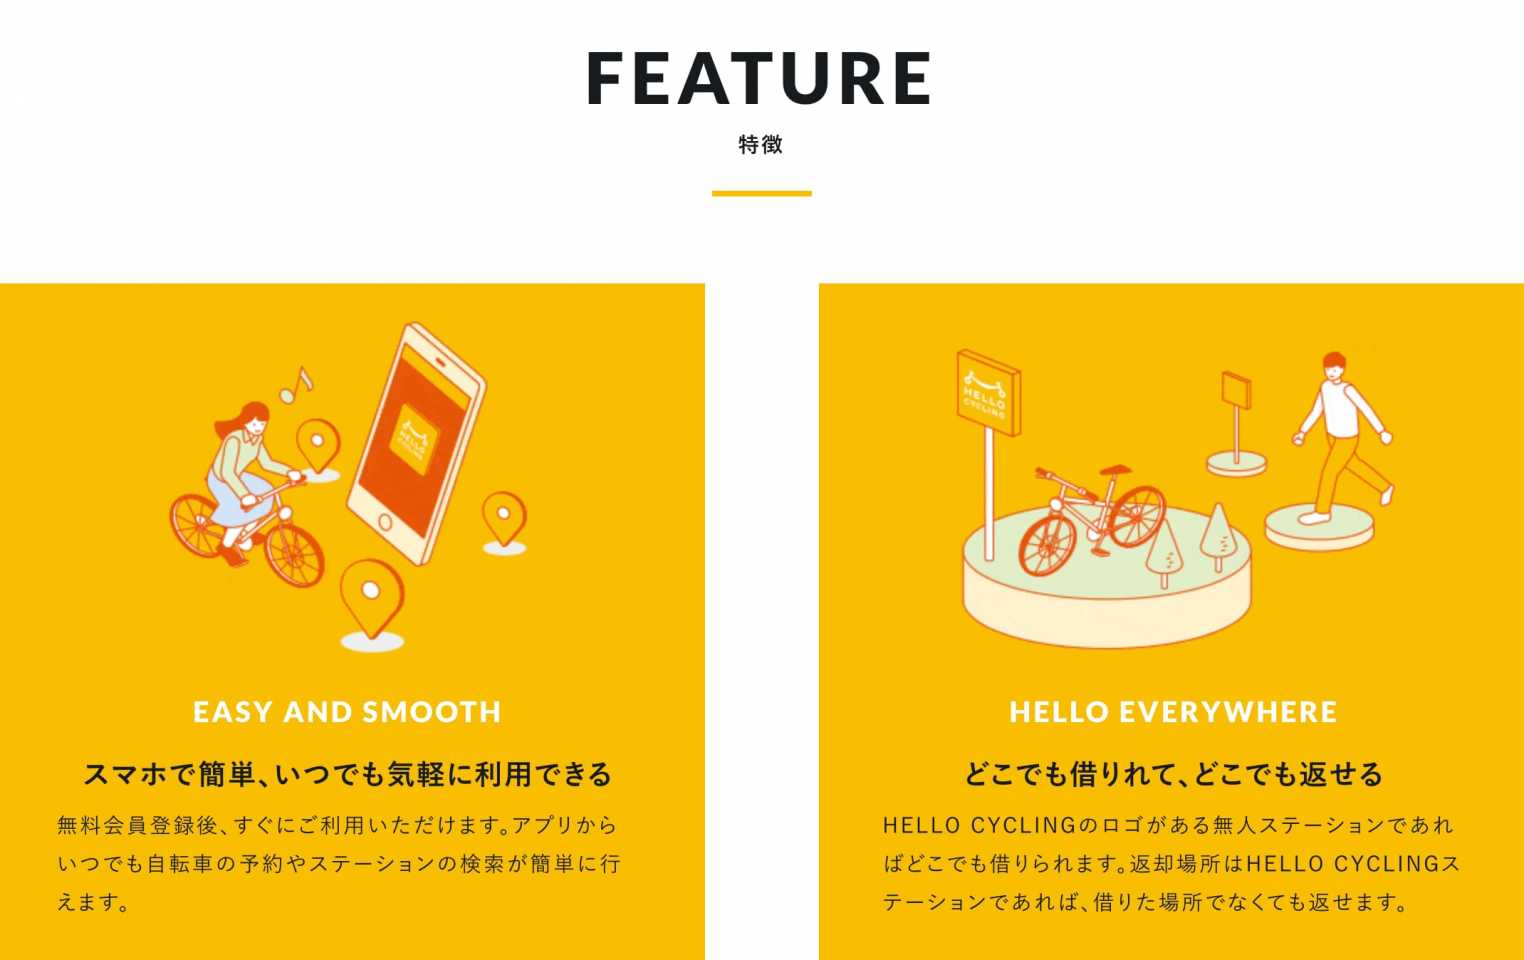 www.hellocycling.jpより引用